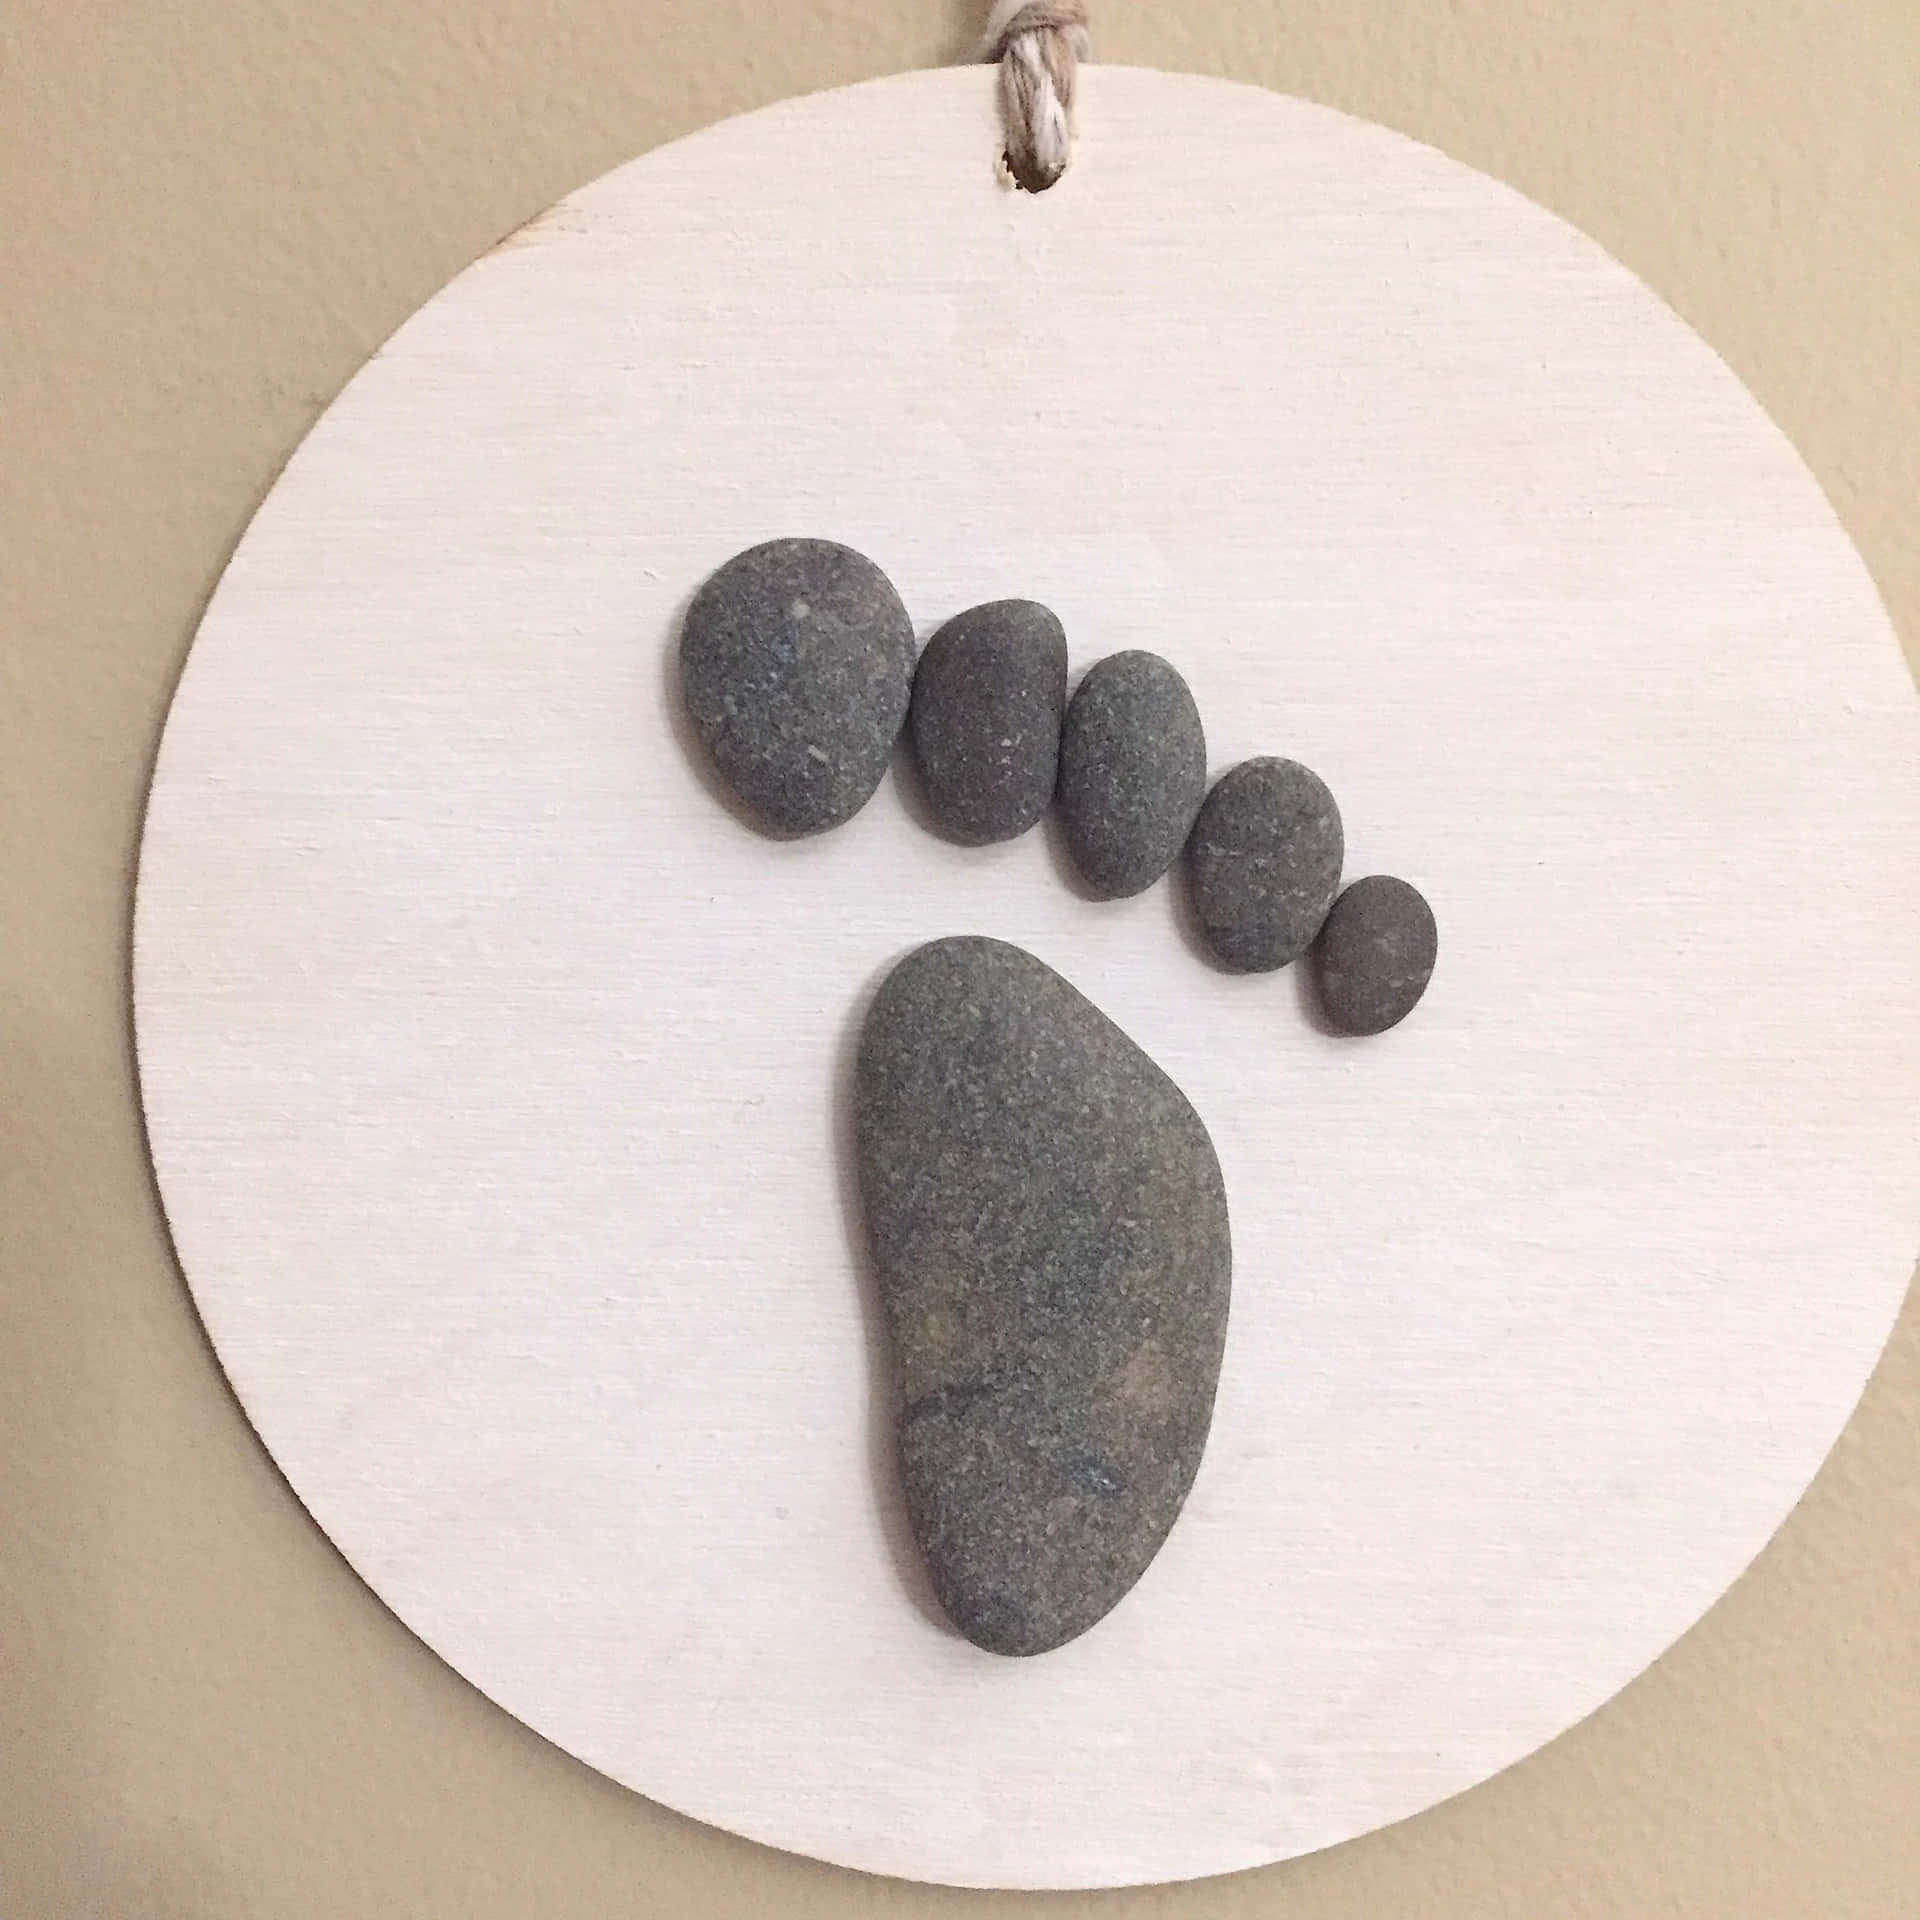 “A beautiful handcrafted Pebble Art design”